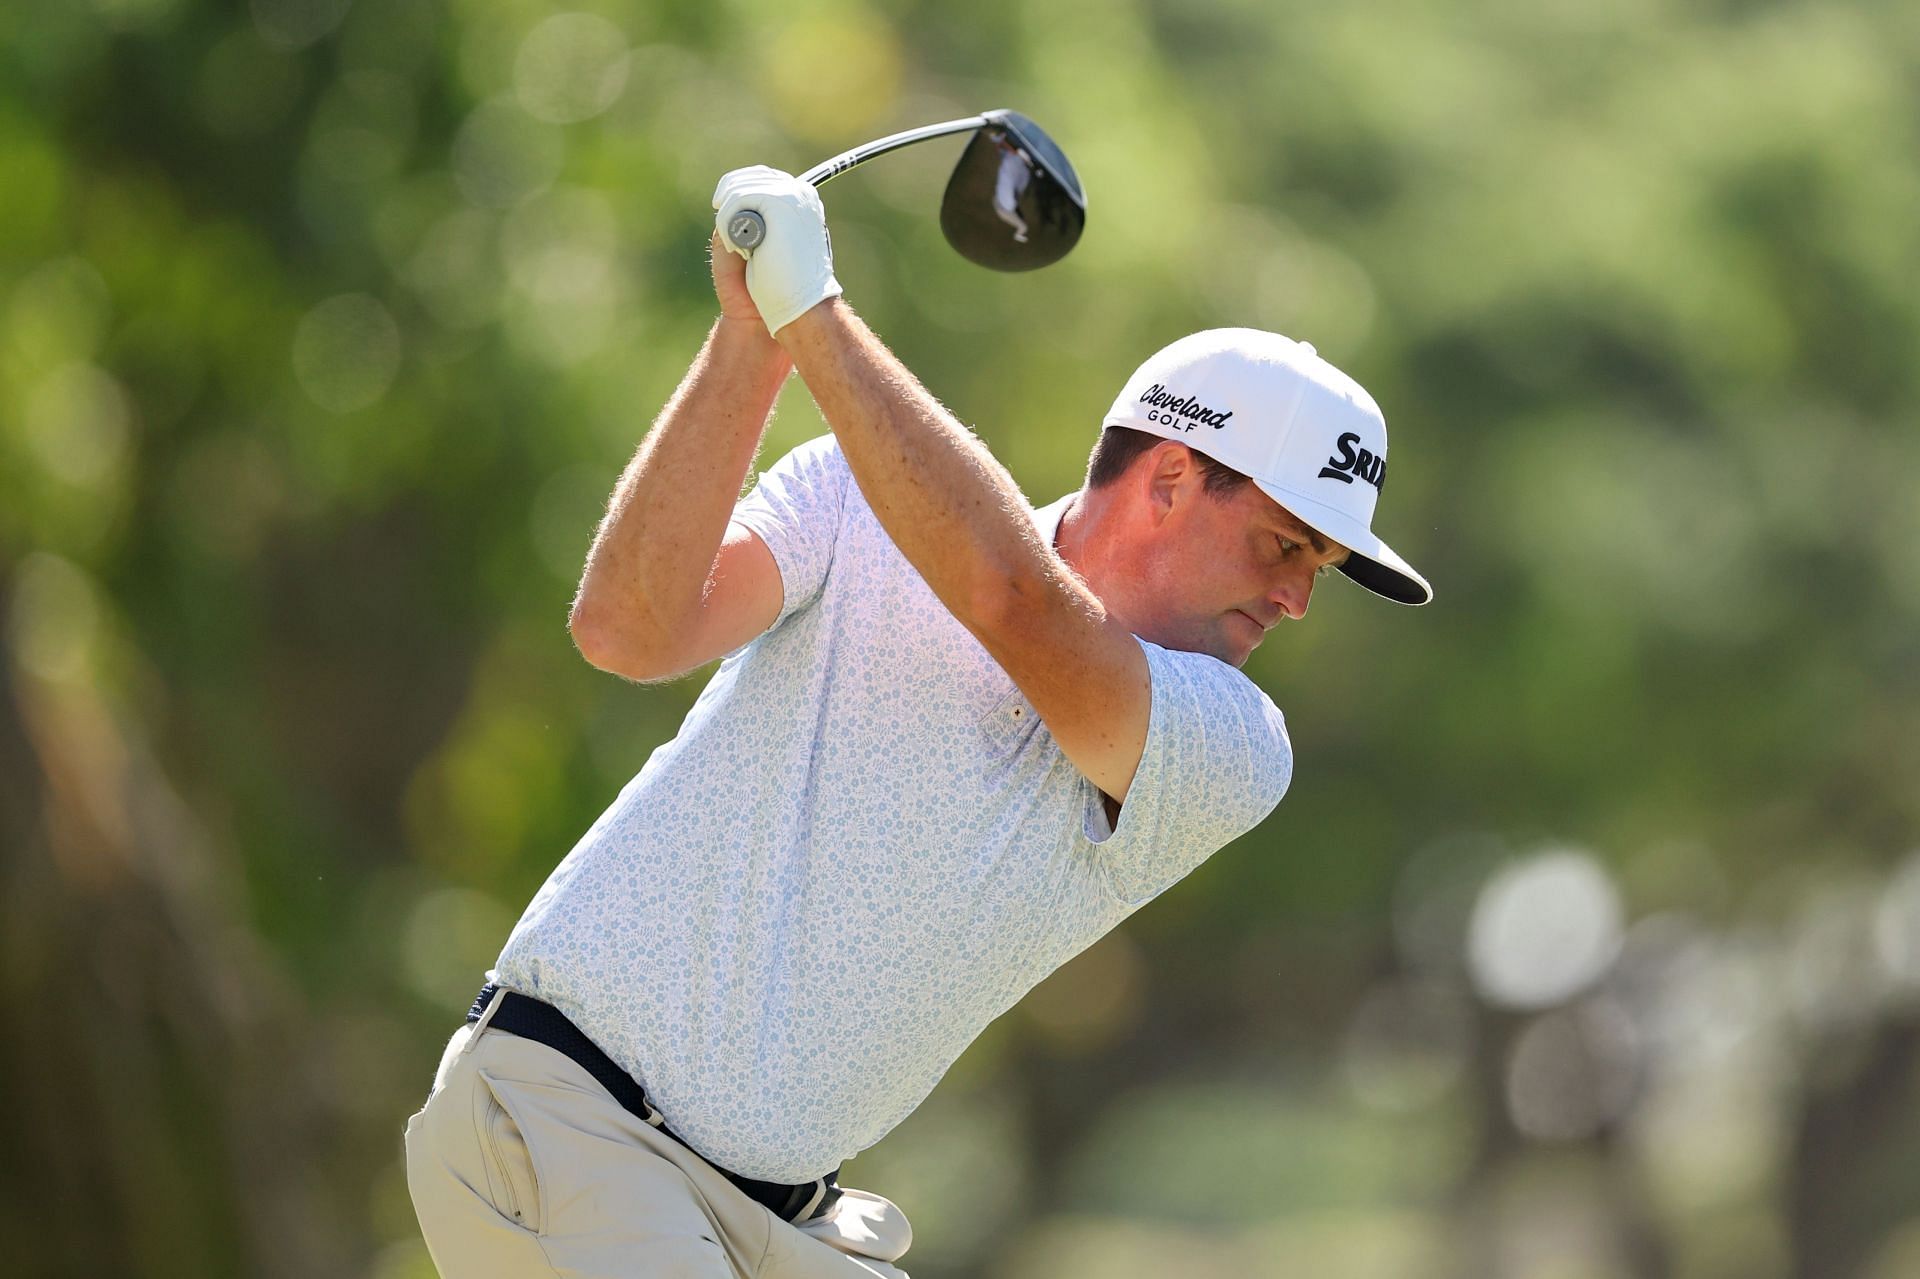 Who is leading the Sony Open in Hawaii after Day 3? Round 3 leaderboard